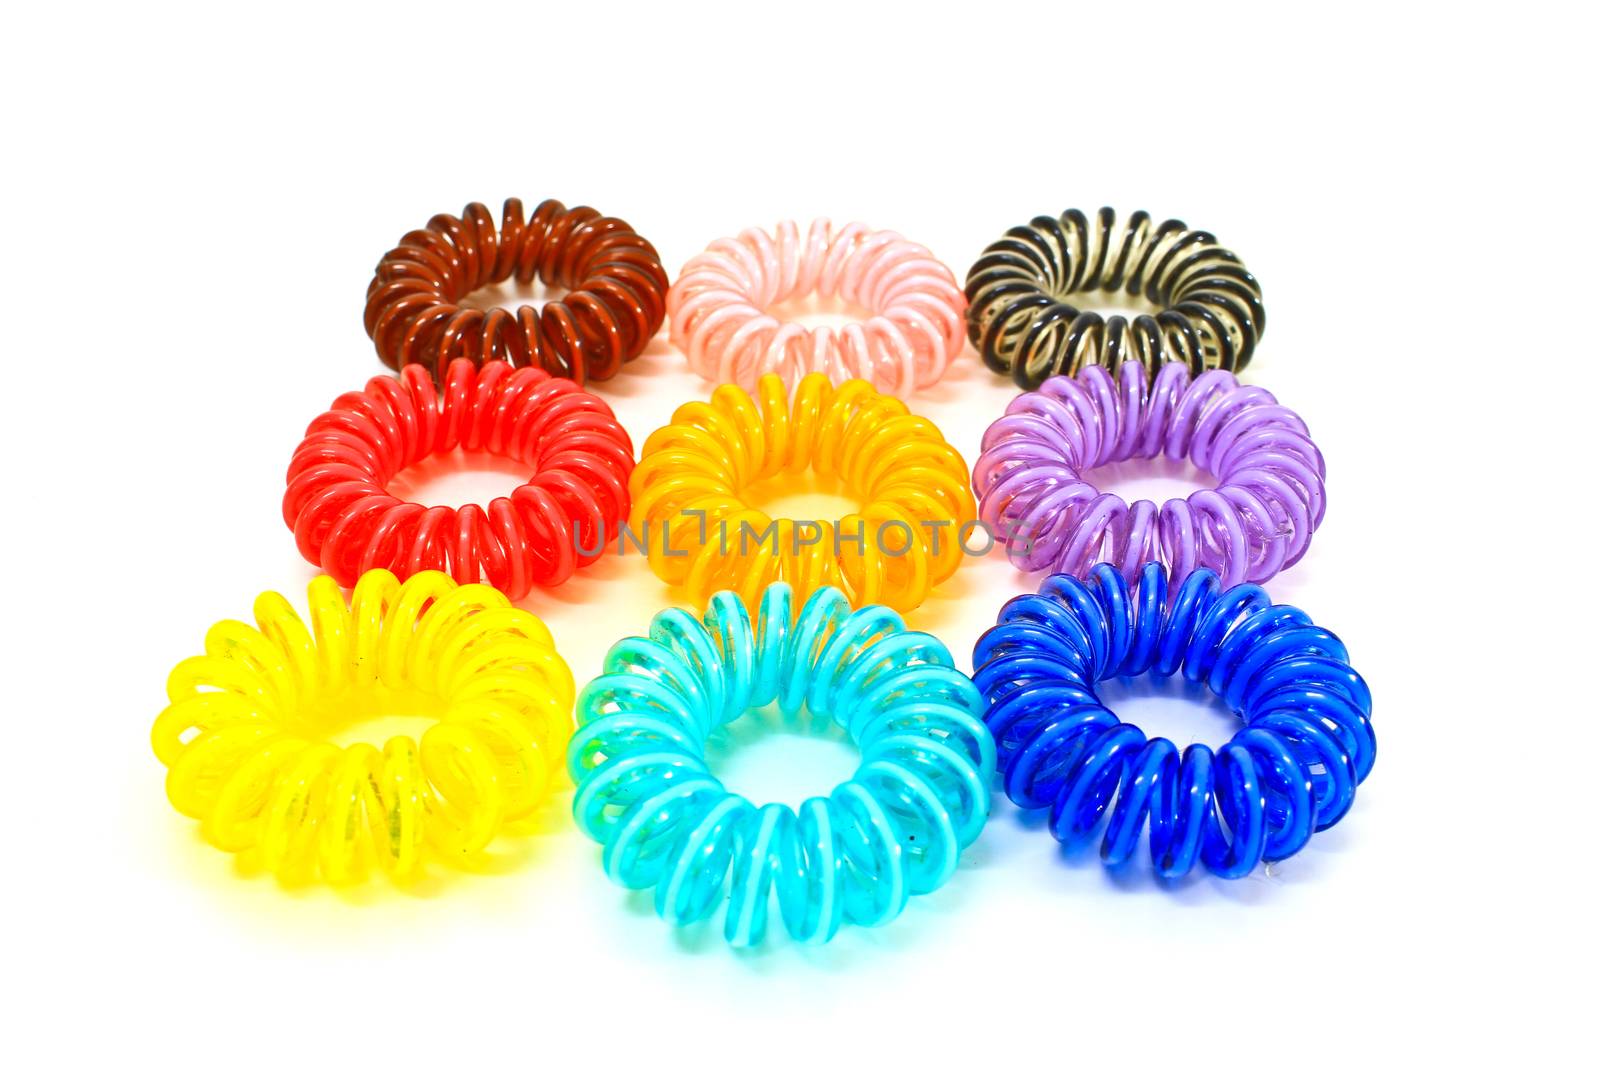 Spiral colorful elastic hair ties used on a white background.